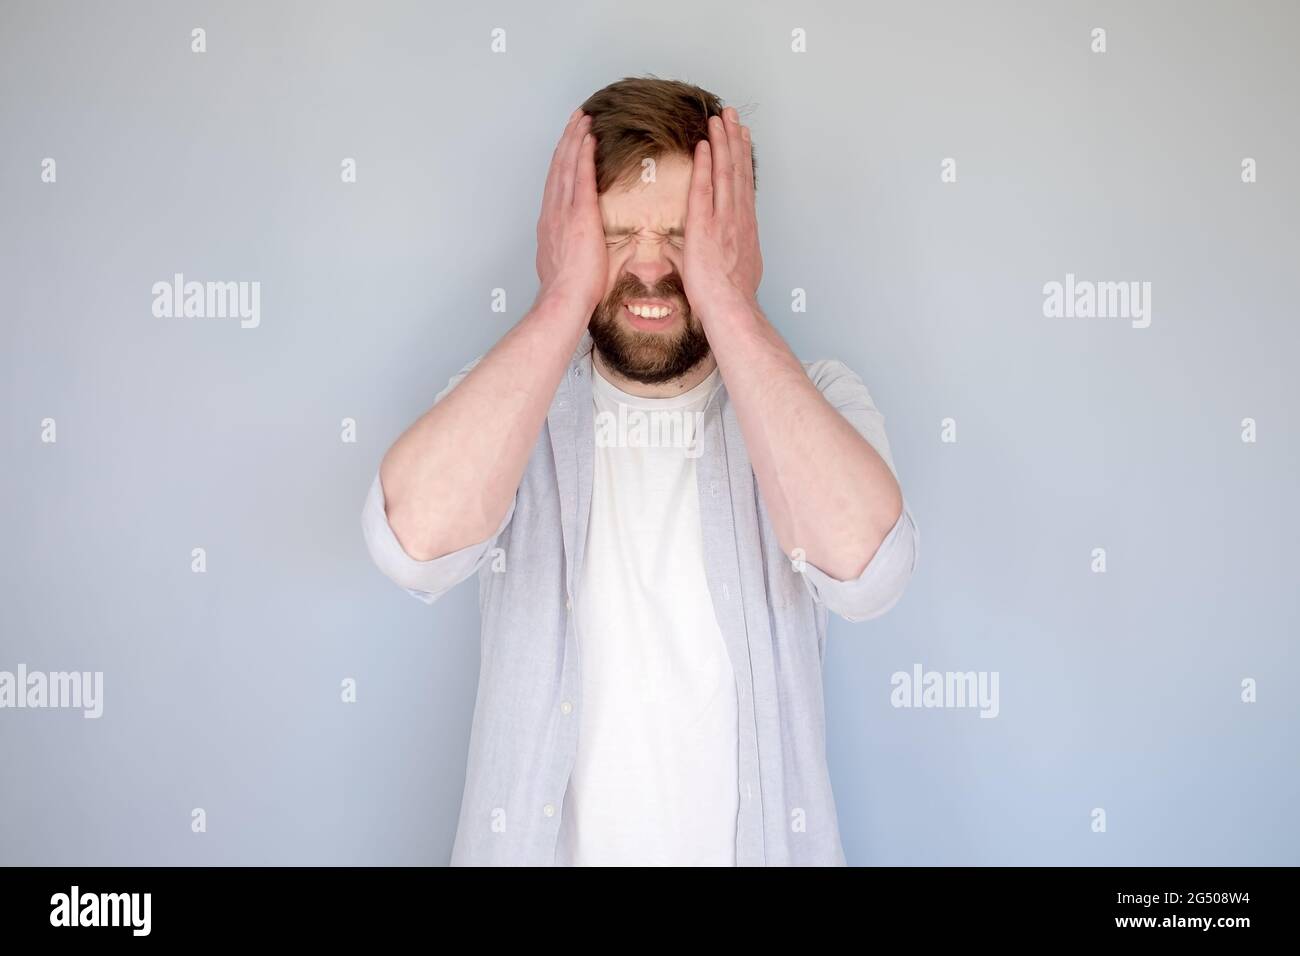 Caucasian man in stress or suffering from headache, he closed his eyes, holds head with hands and bares teeth. Gray background. Stock Photo